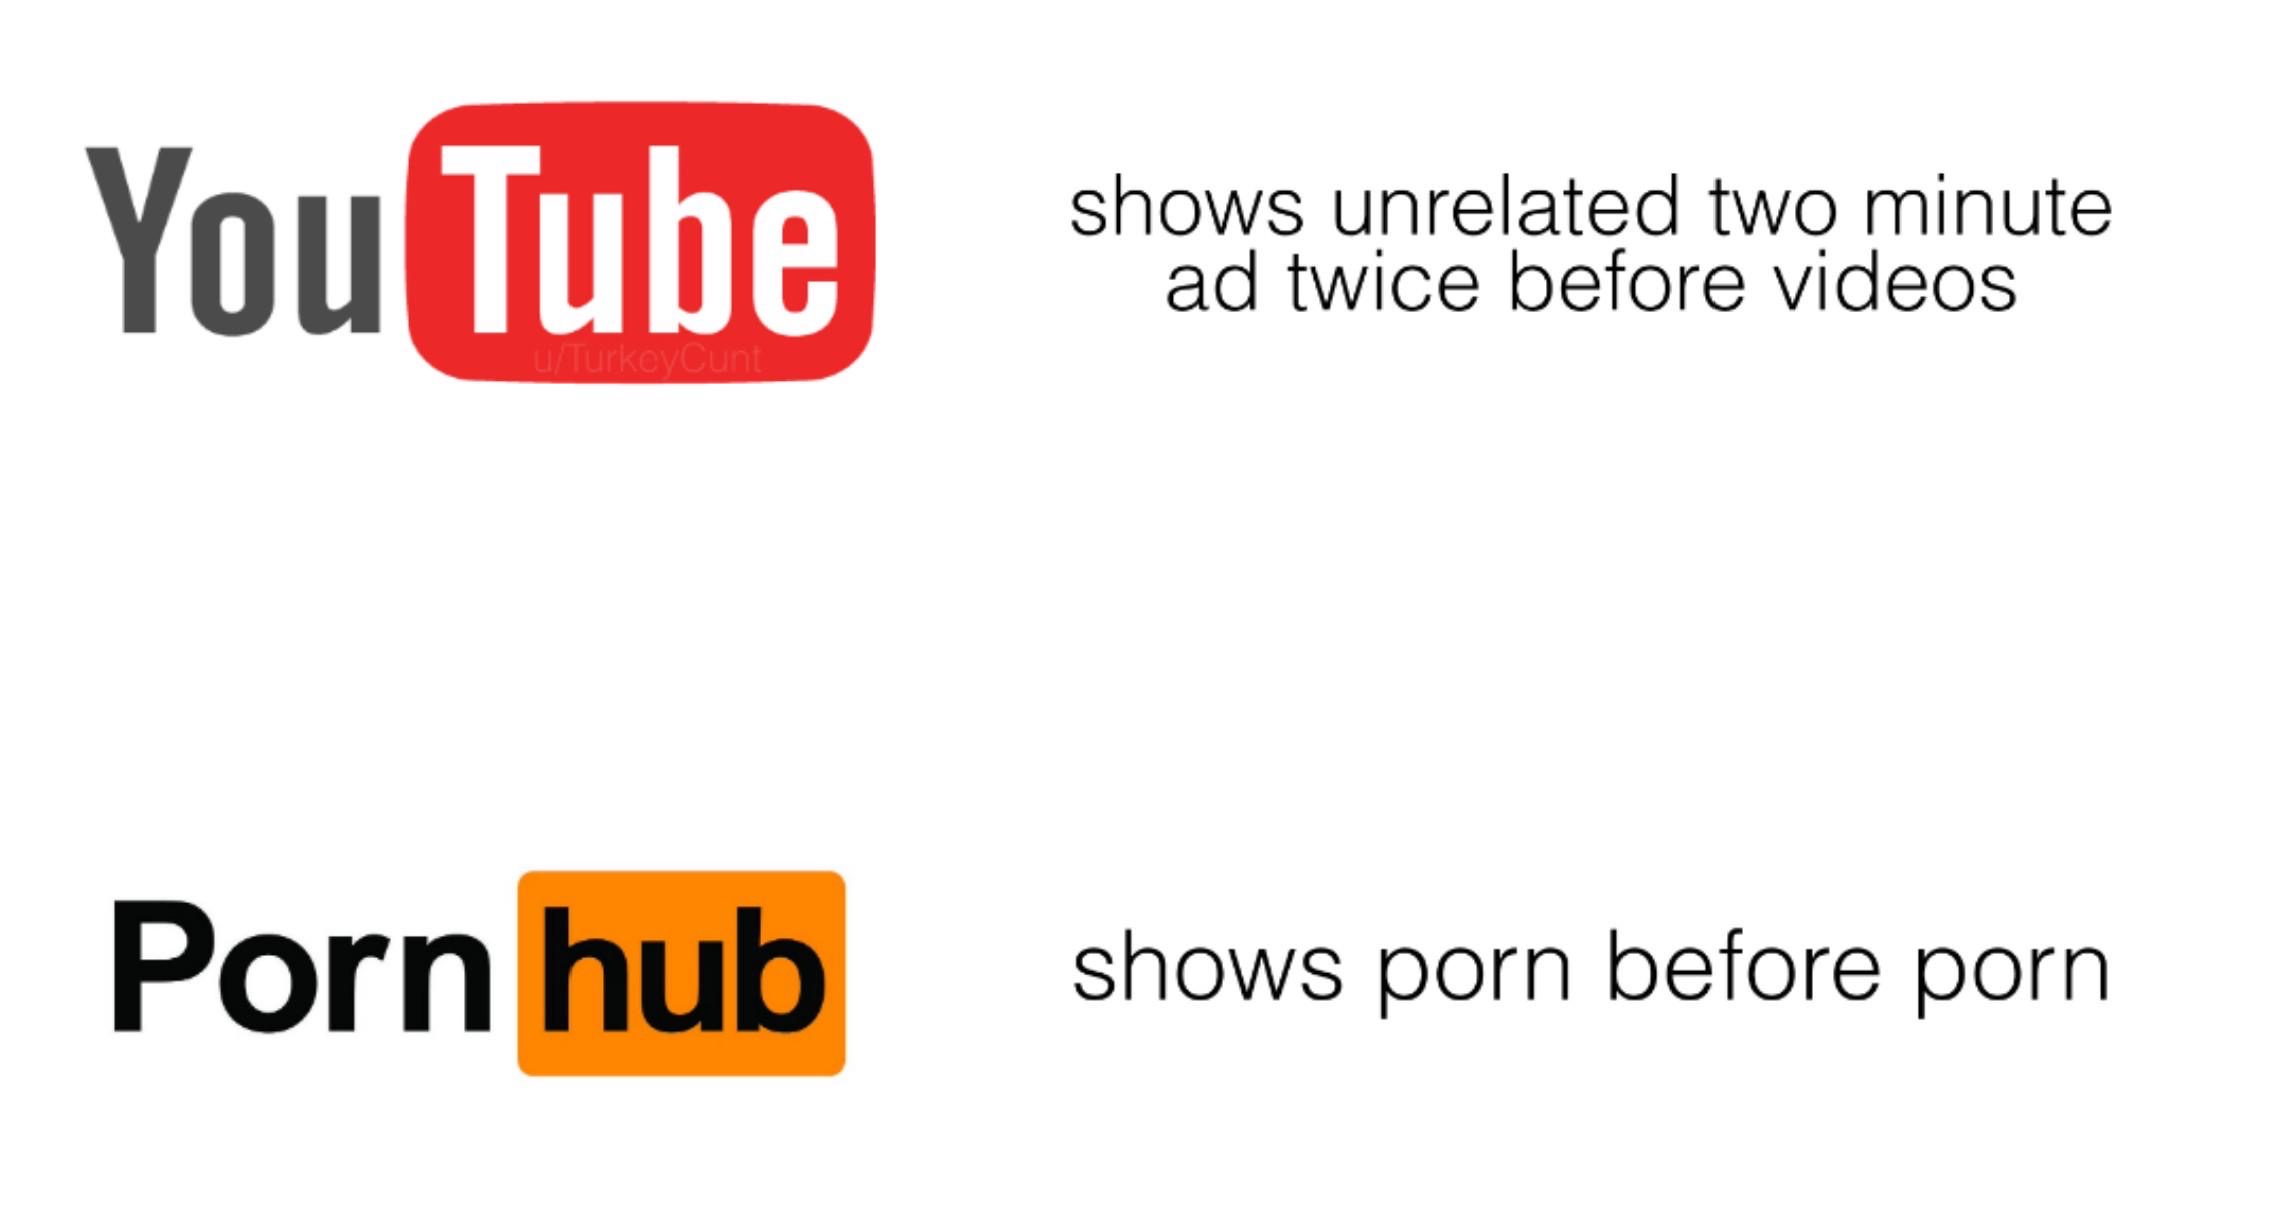 youtube - You Tube shows unrelated two minute ad twice before videos uTurkeyCunt Porn hub shows porn before porn